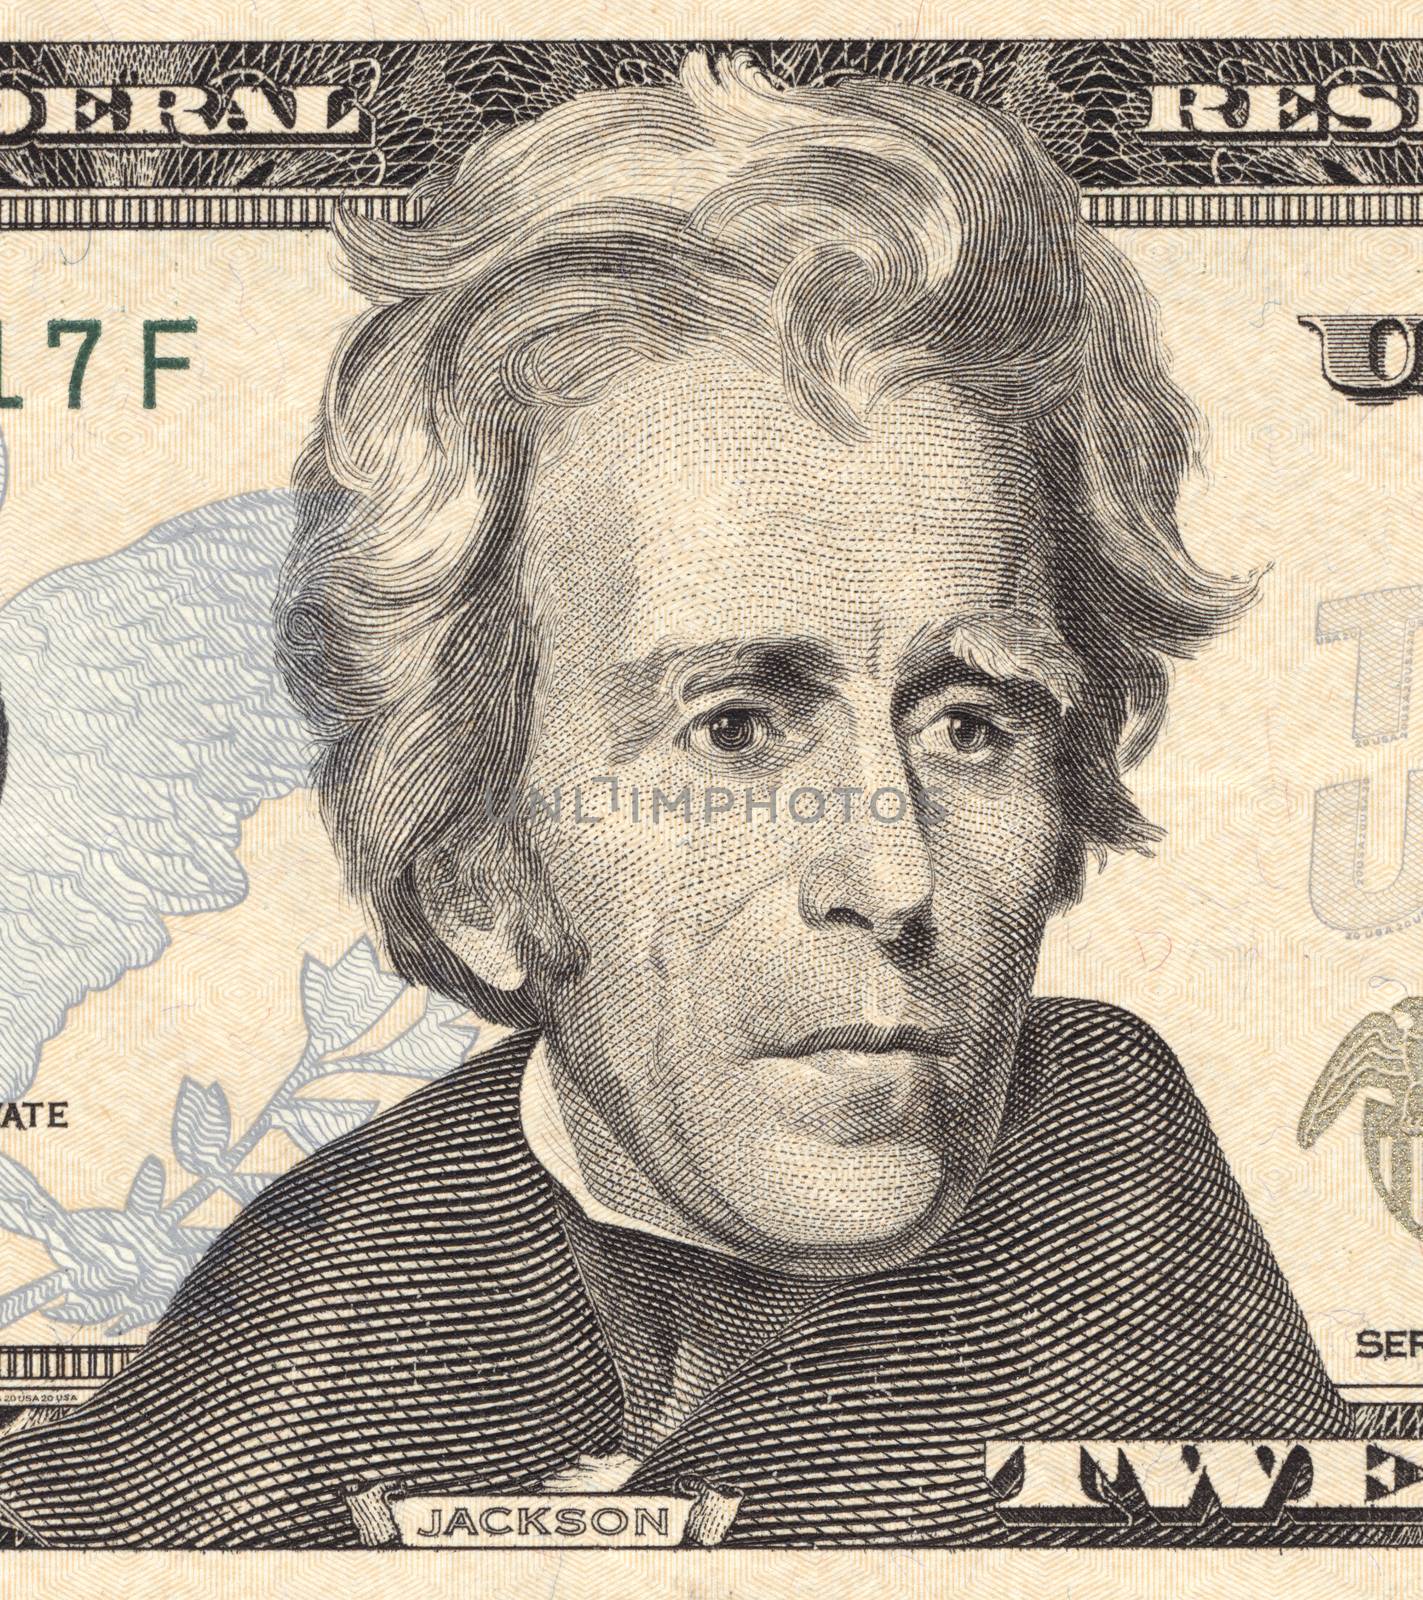 Andrew Jackson as depicted on the US twenty dollar bill. True colours